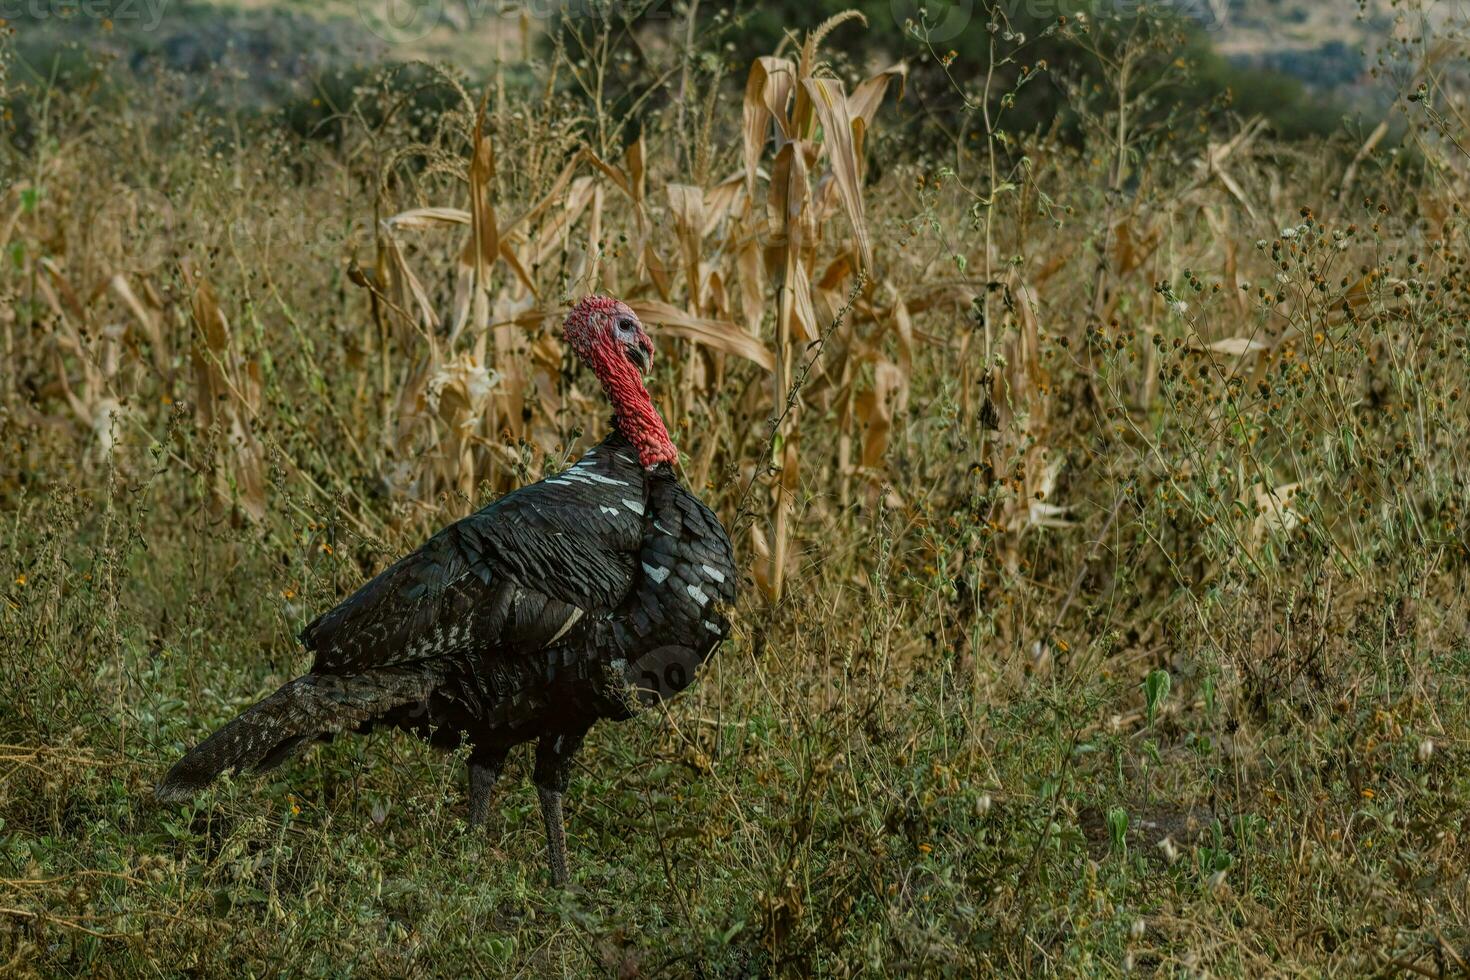 The turkey, a bird of nature, blends with the plant-filled surroundings photo